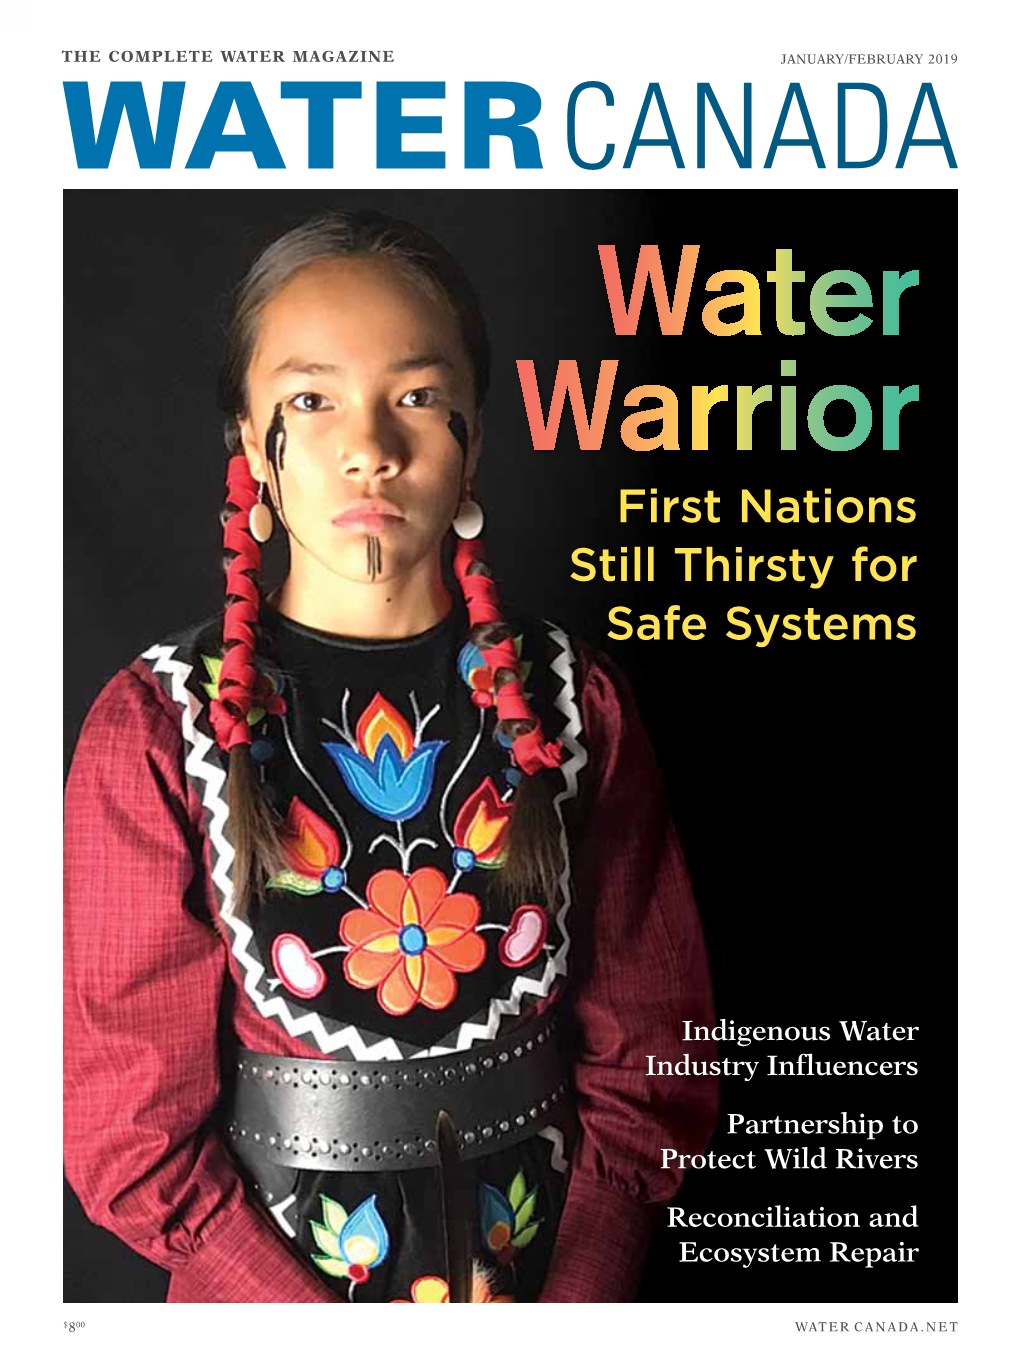 First Nations Still Thirsty for Safe Systems